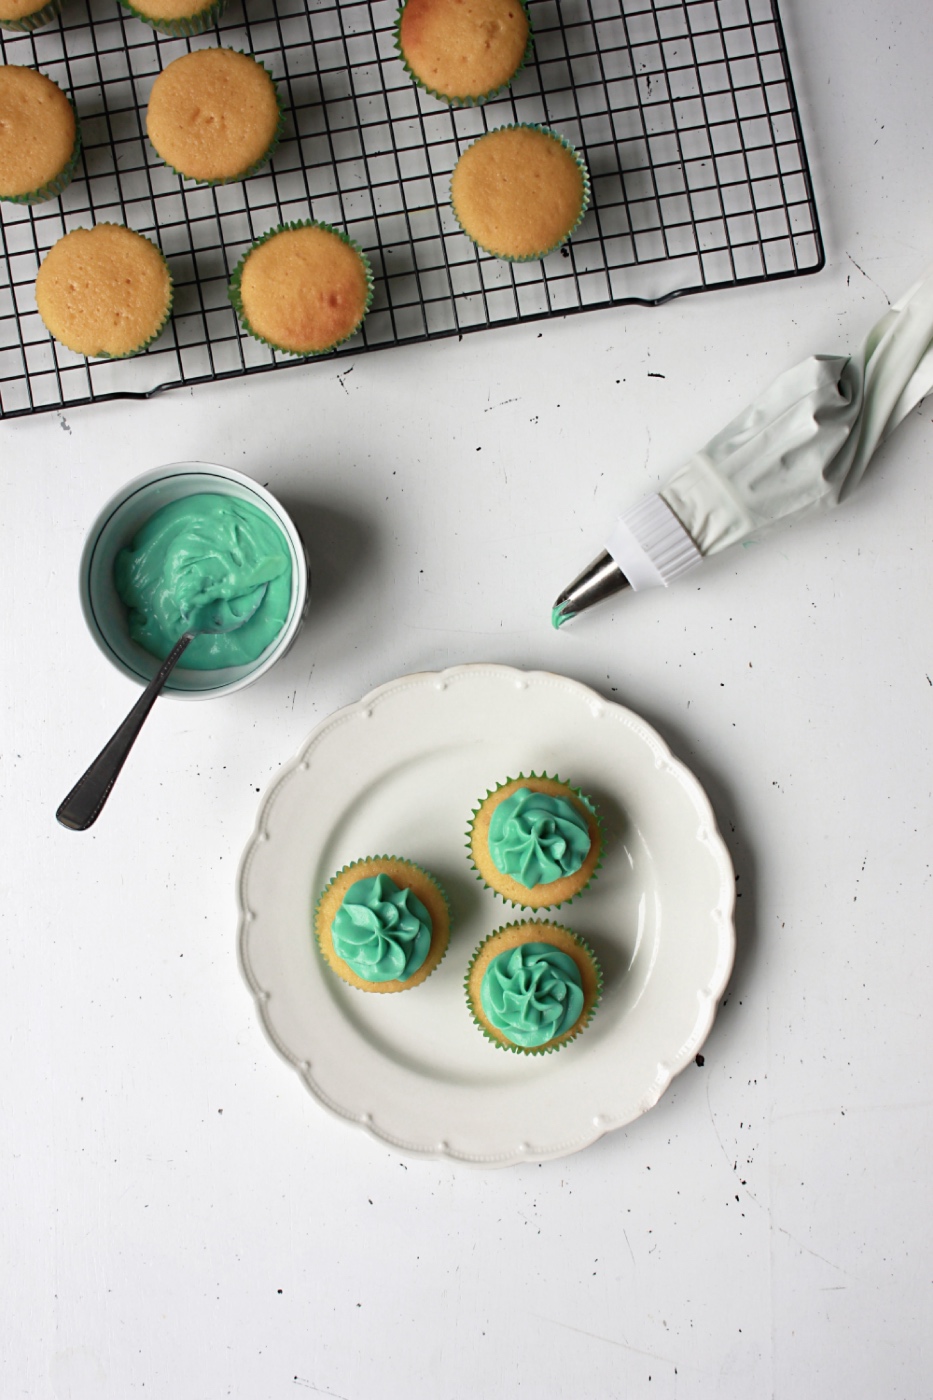 adding green frosting to the buttermilk cupcakes pop shop america